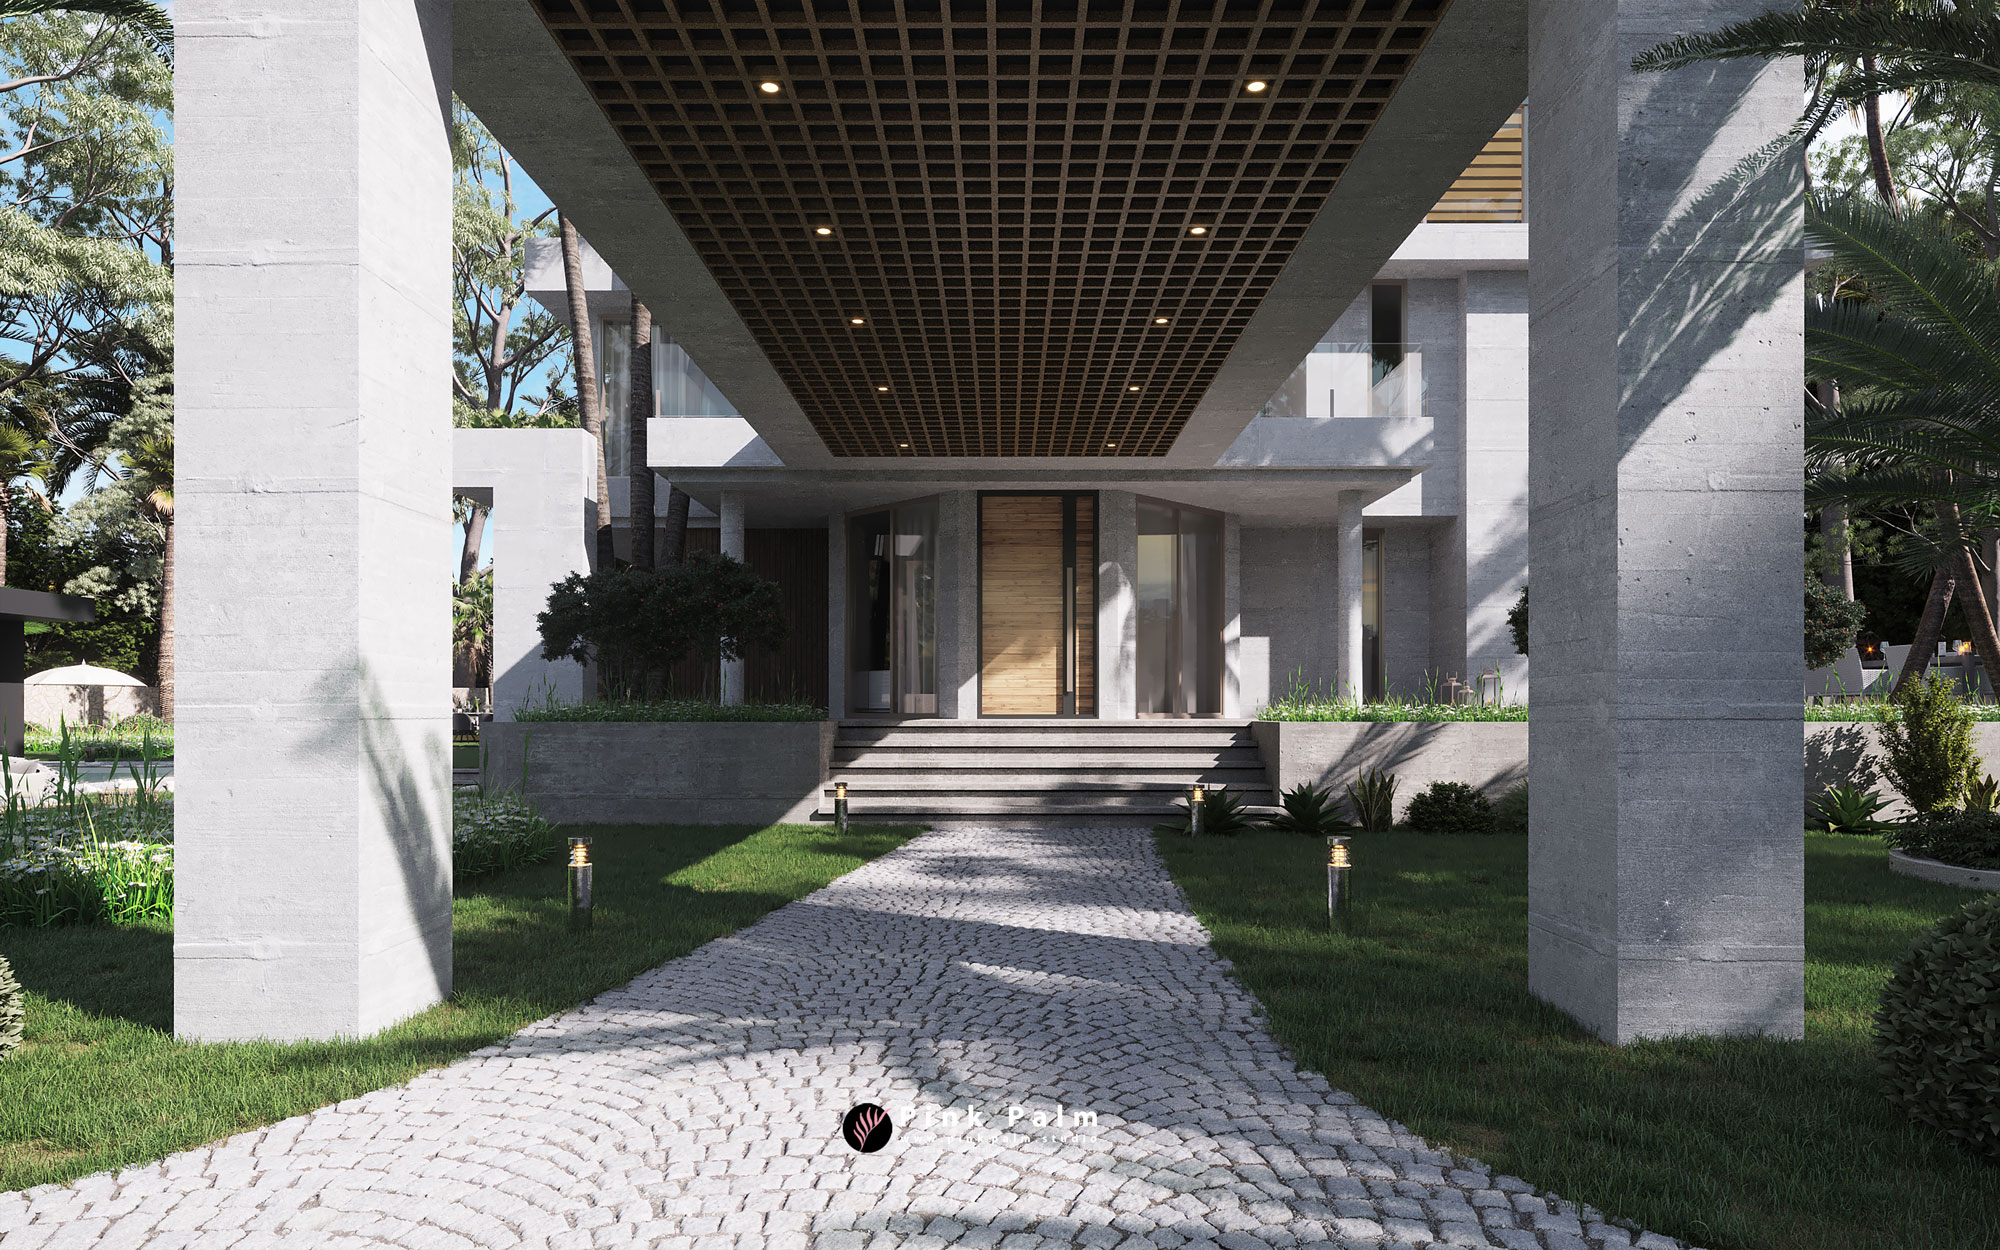 3D Rendering Services for Architecture and Real Estate